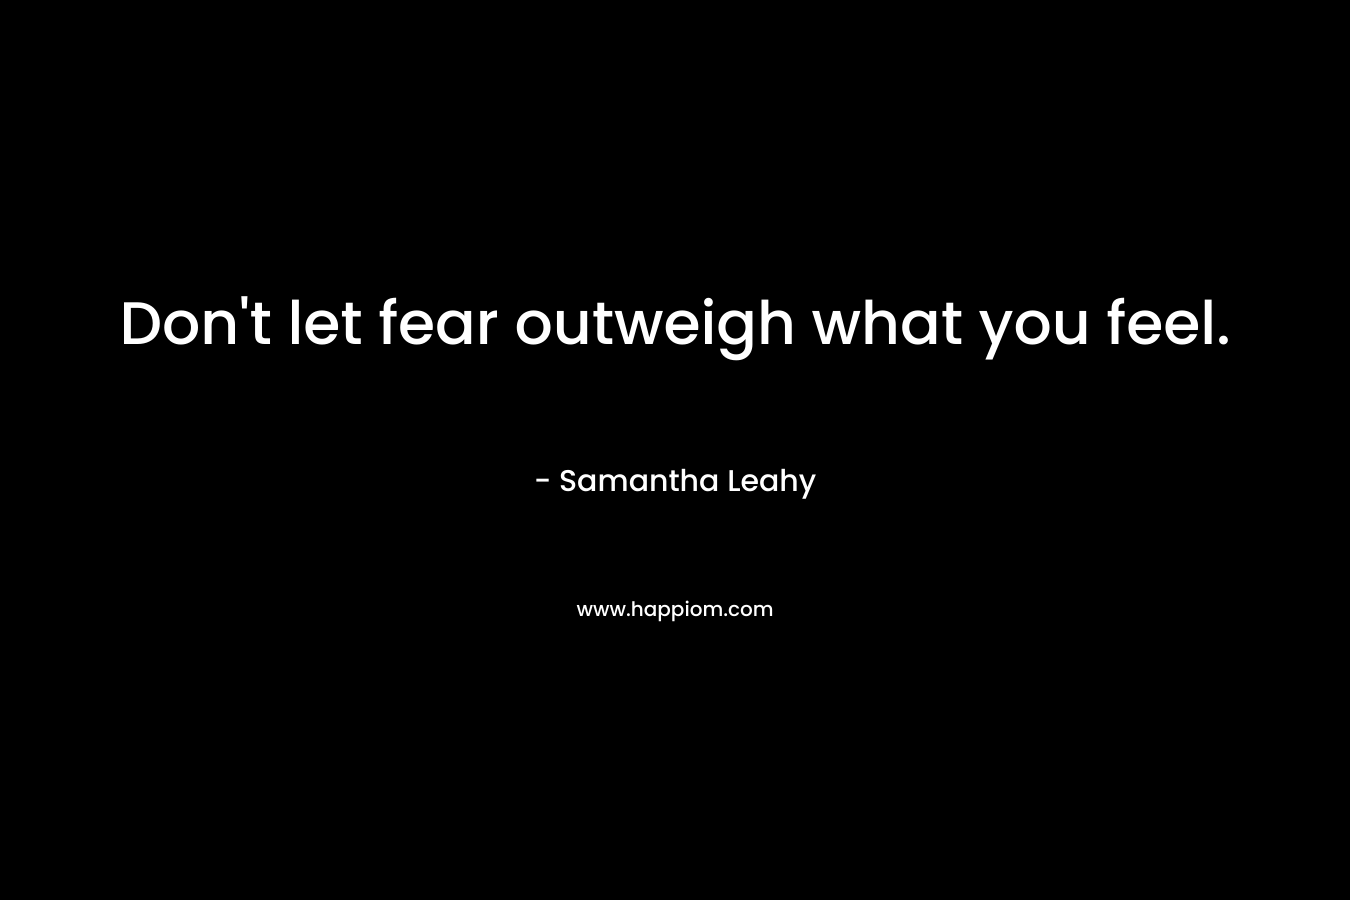 Don't let fear outweigh what you feel.